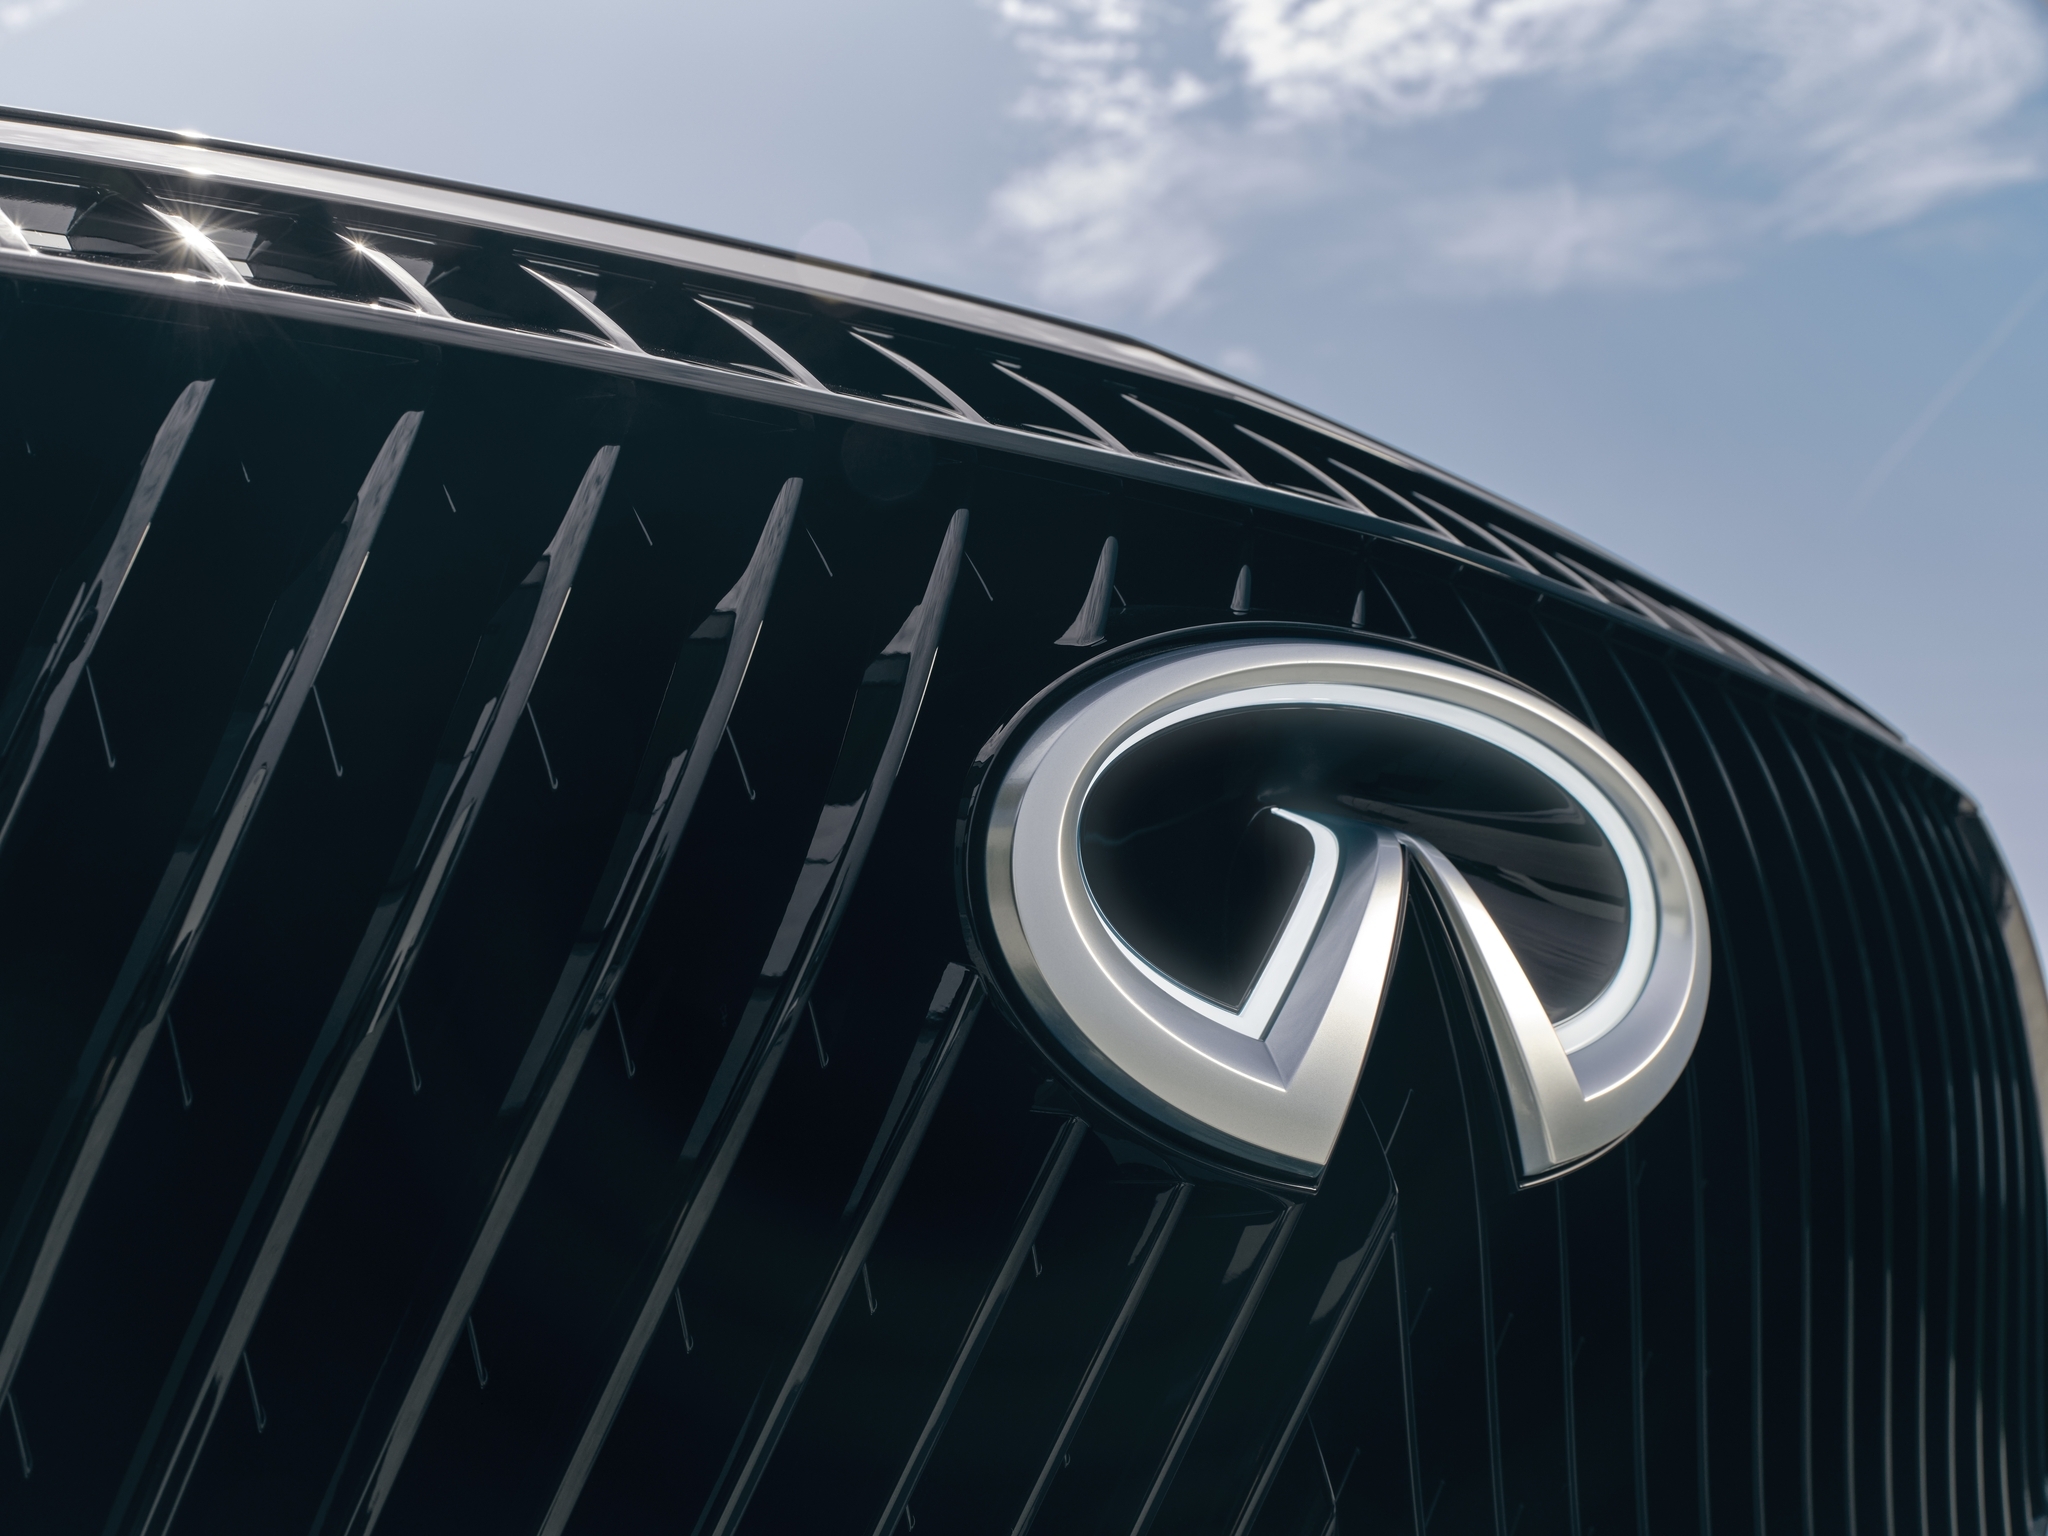 Infiniti has announced a new generation of SUV QX80